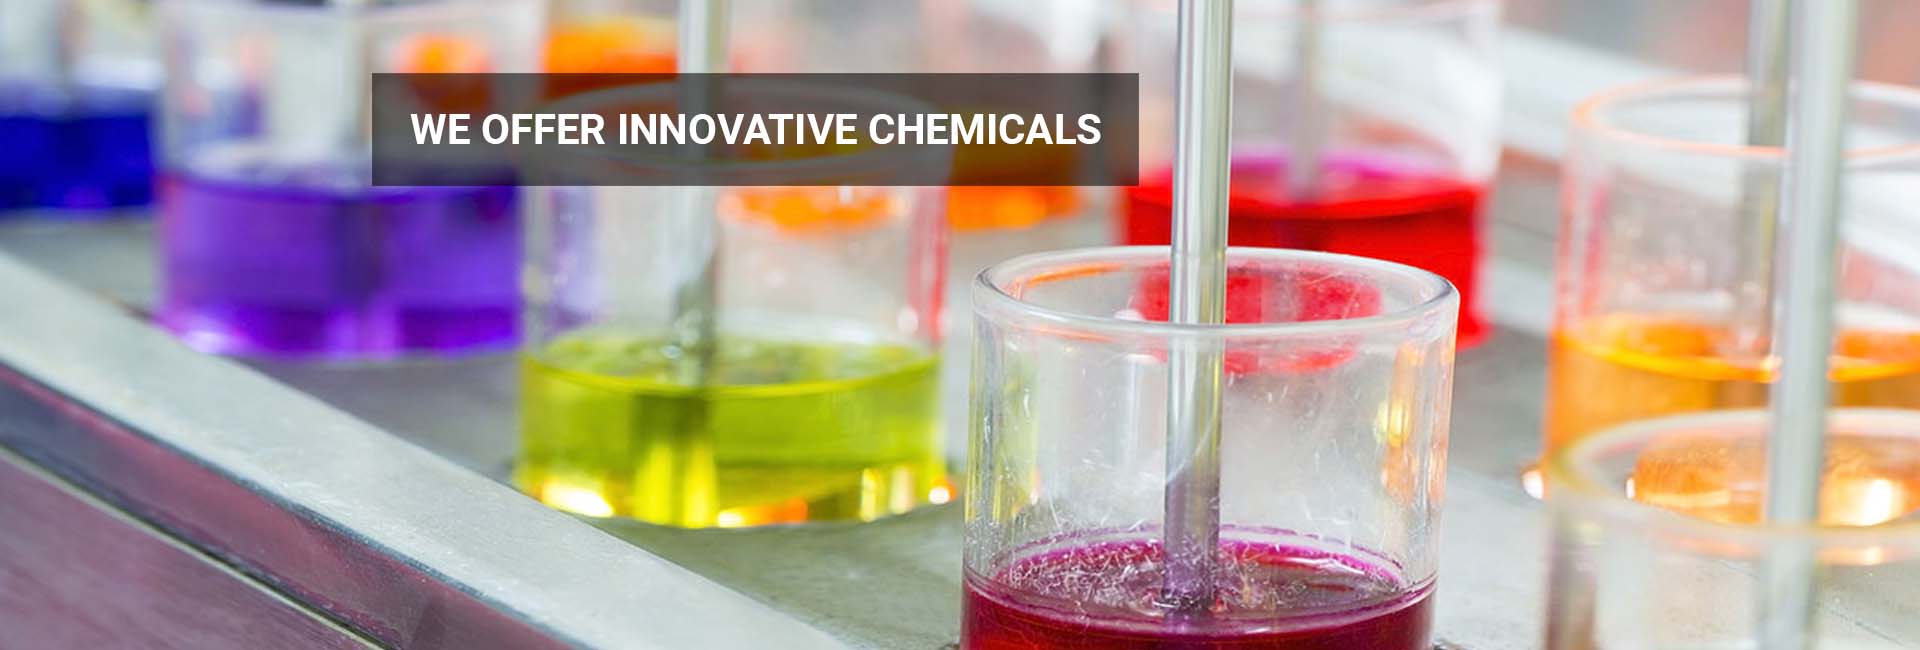 We offer innovative chemicals